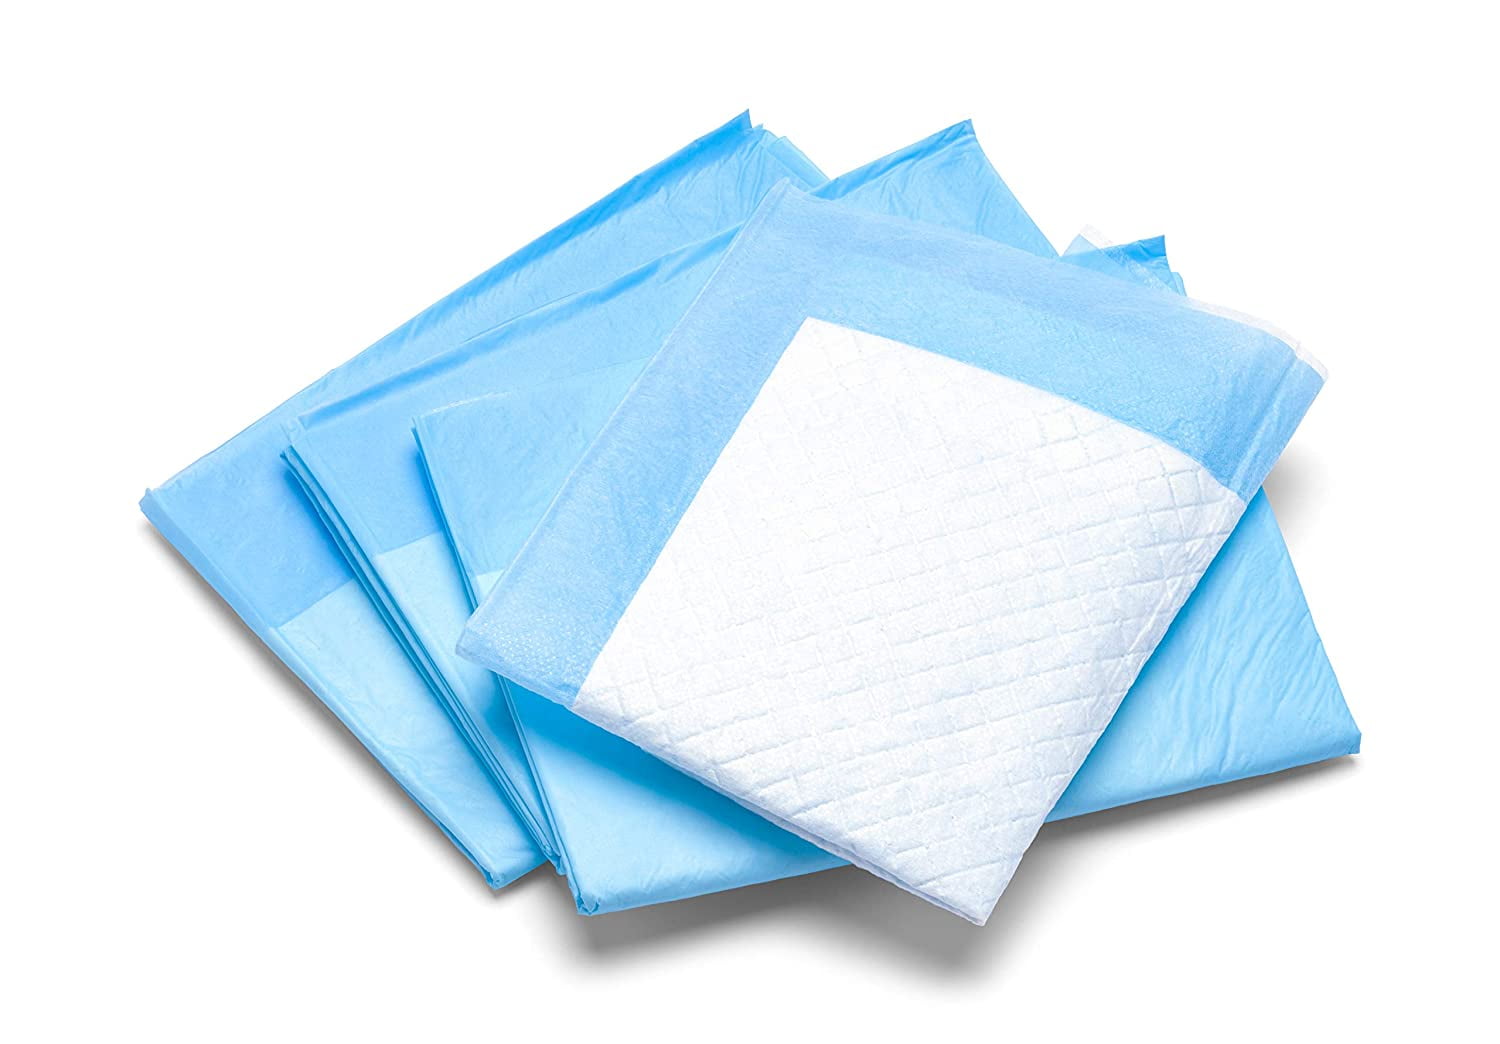 Disposable Incontinence Bed Pads 23 x 36, 50 Pack - Light Absorbent Chux Underpads with Fluff Core - Leak Proof Poly Backing, Non-Woven Top Sheet